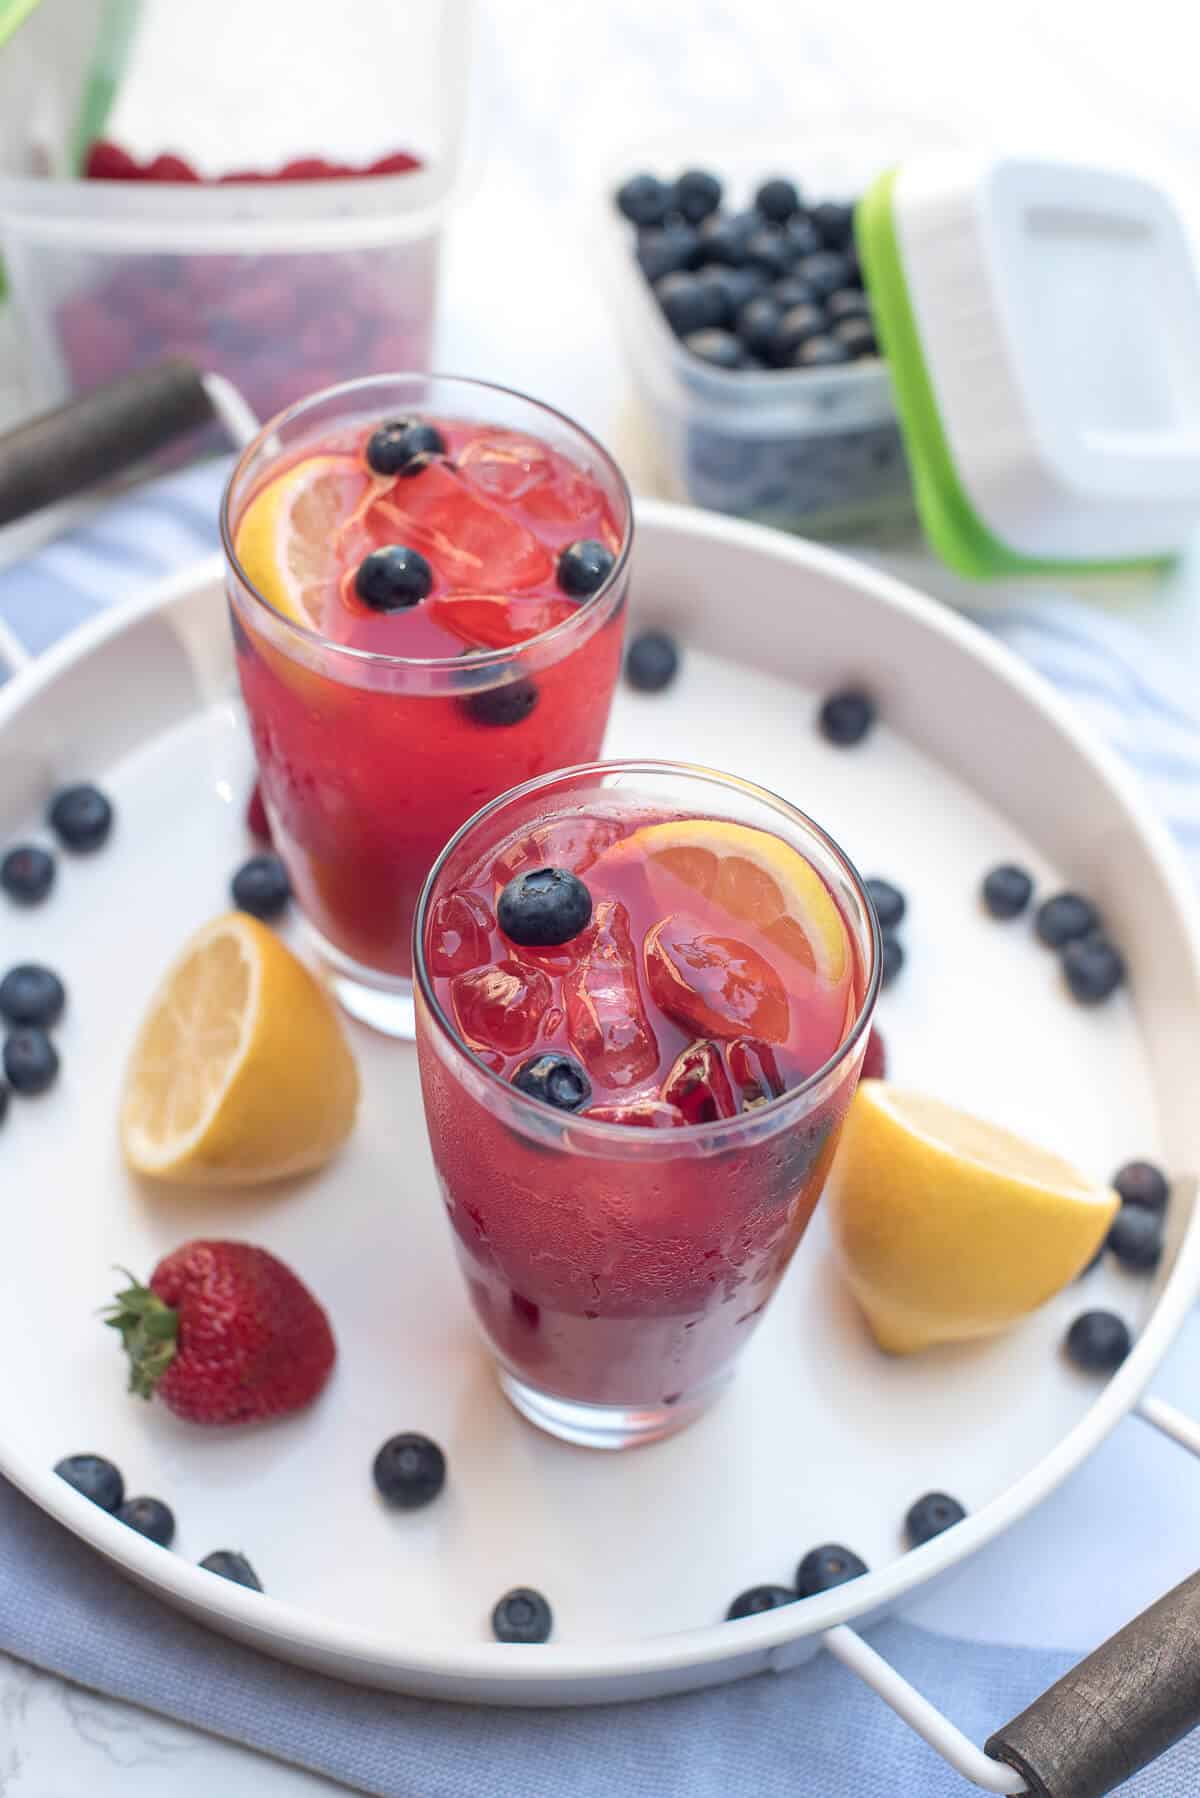 An overhead shot of two glasses of Berry Lemonade on a white tray with lemons, blueberries, and strawberries.